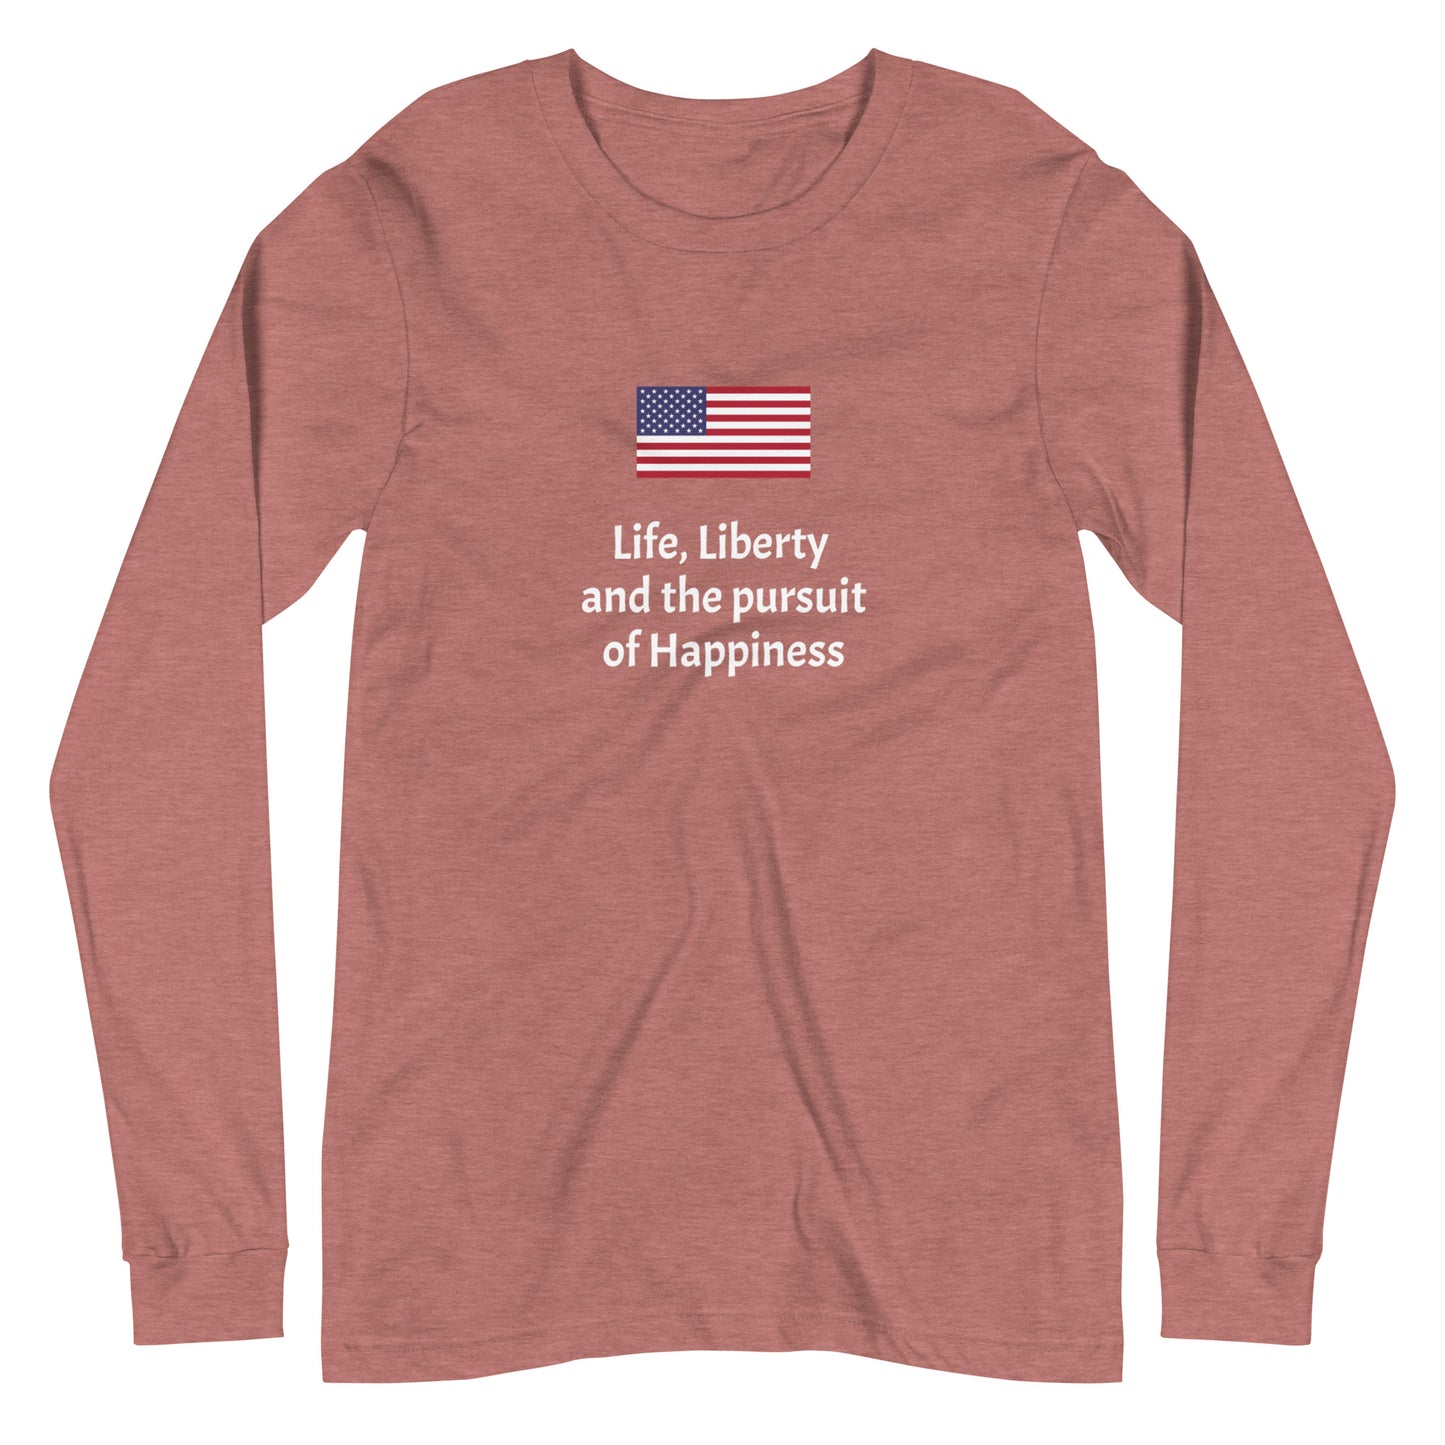 Life, Liberty and the pursuit of Happiness unisex long sleeve tee